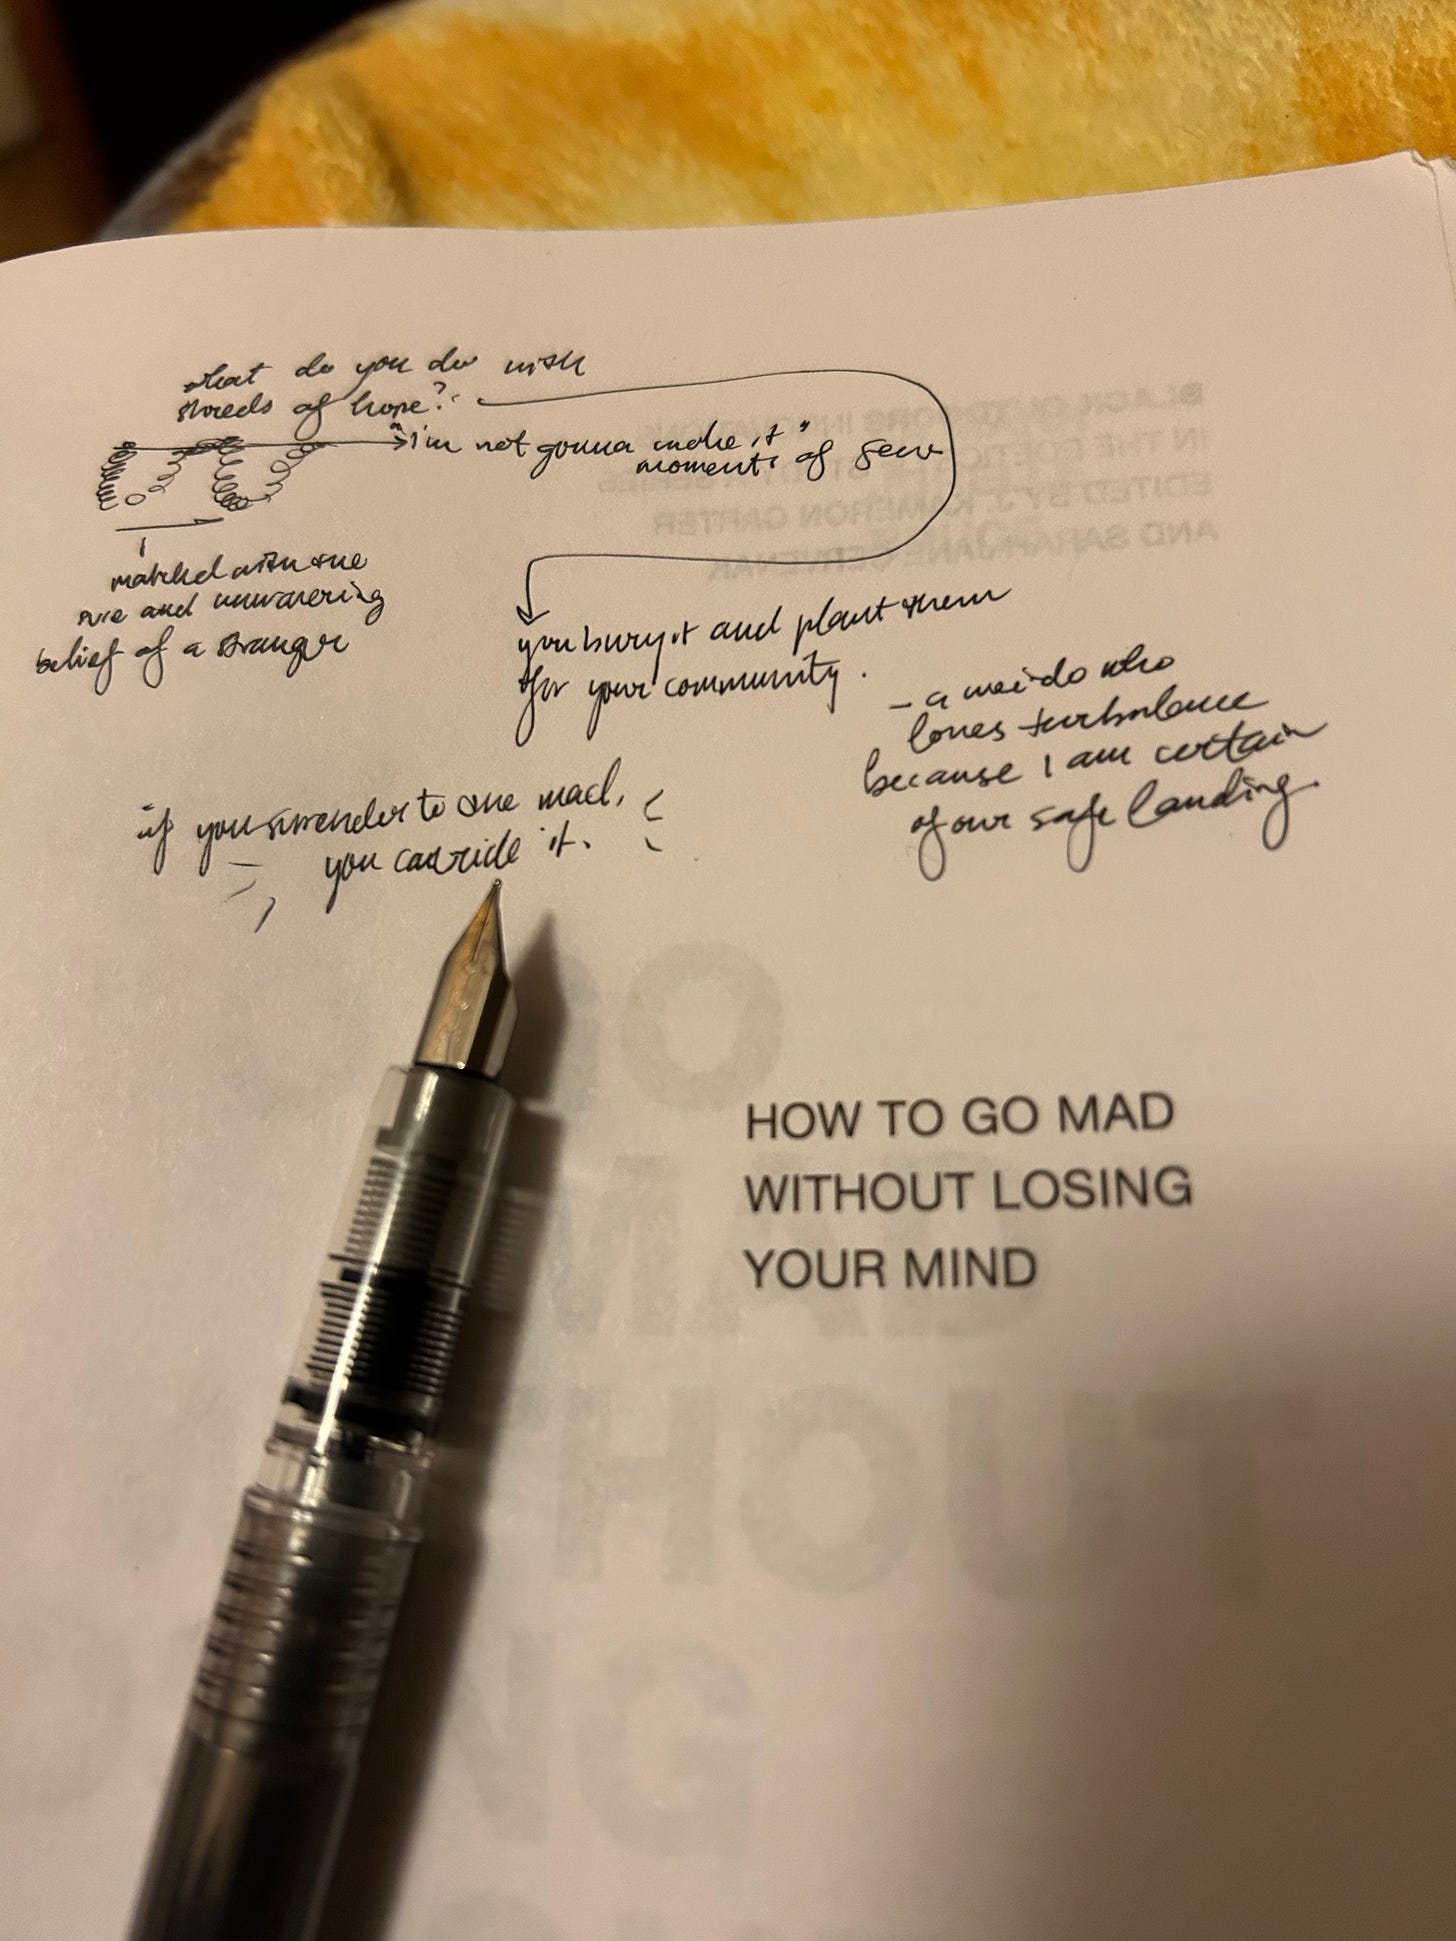 the title page of How to Go Mad without Losing Your Mind, with notes from the author of the essay (ismatu) and a fountain tip nib in frame